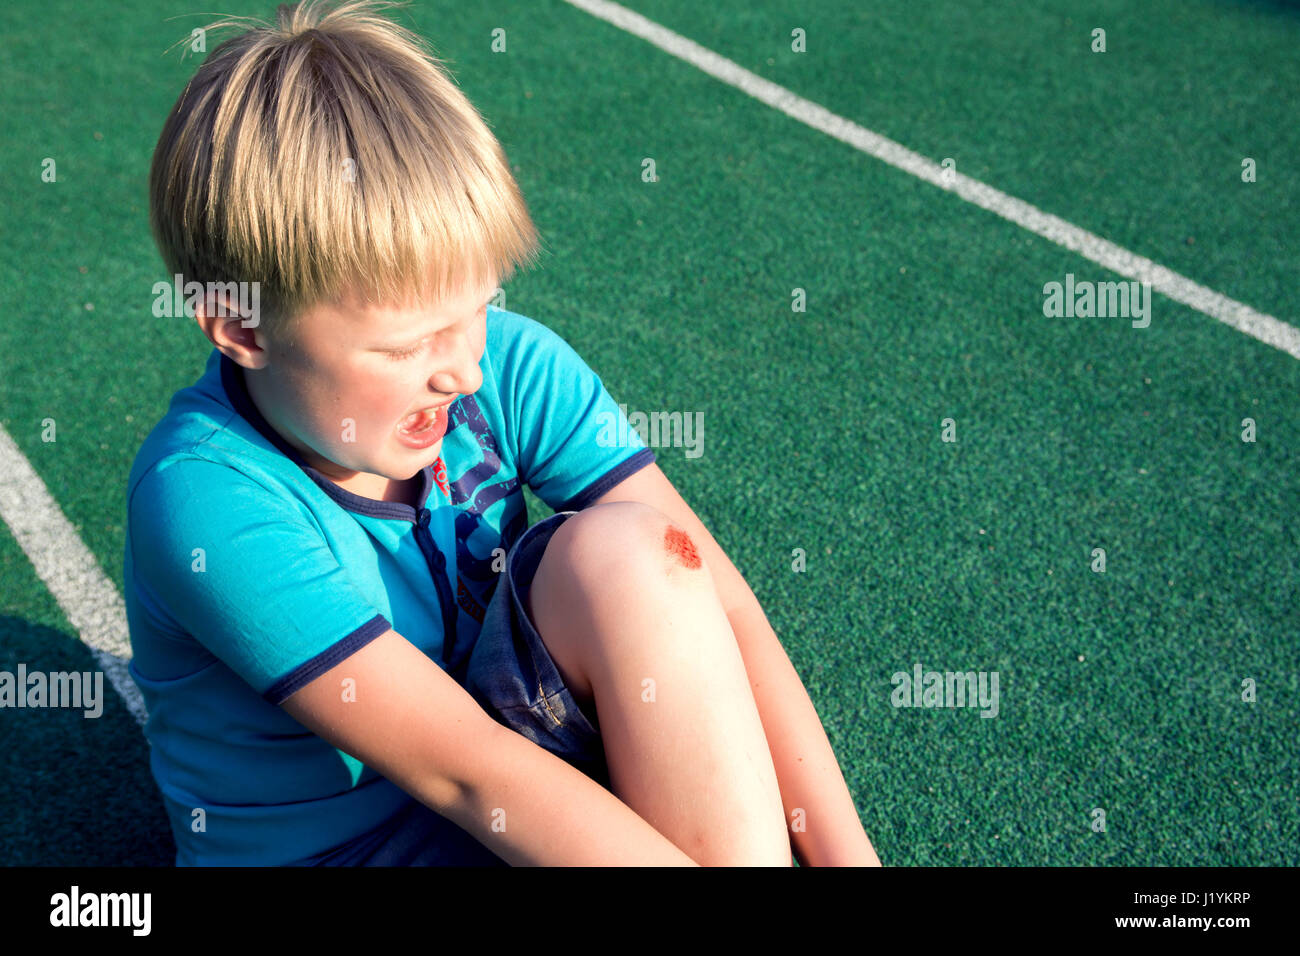 Boy with a scraped knee outdoor. Wound on boy knee after accident. Stock Photo